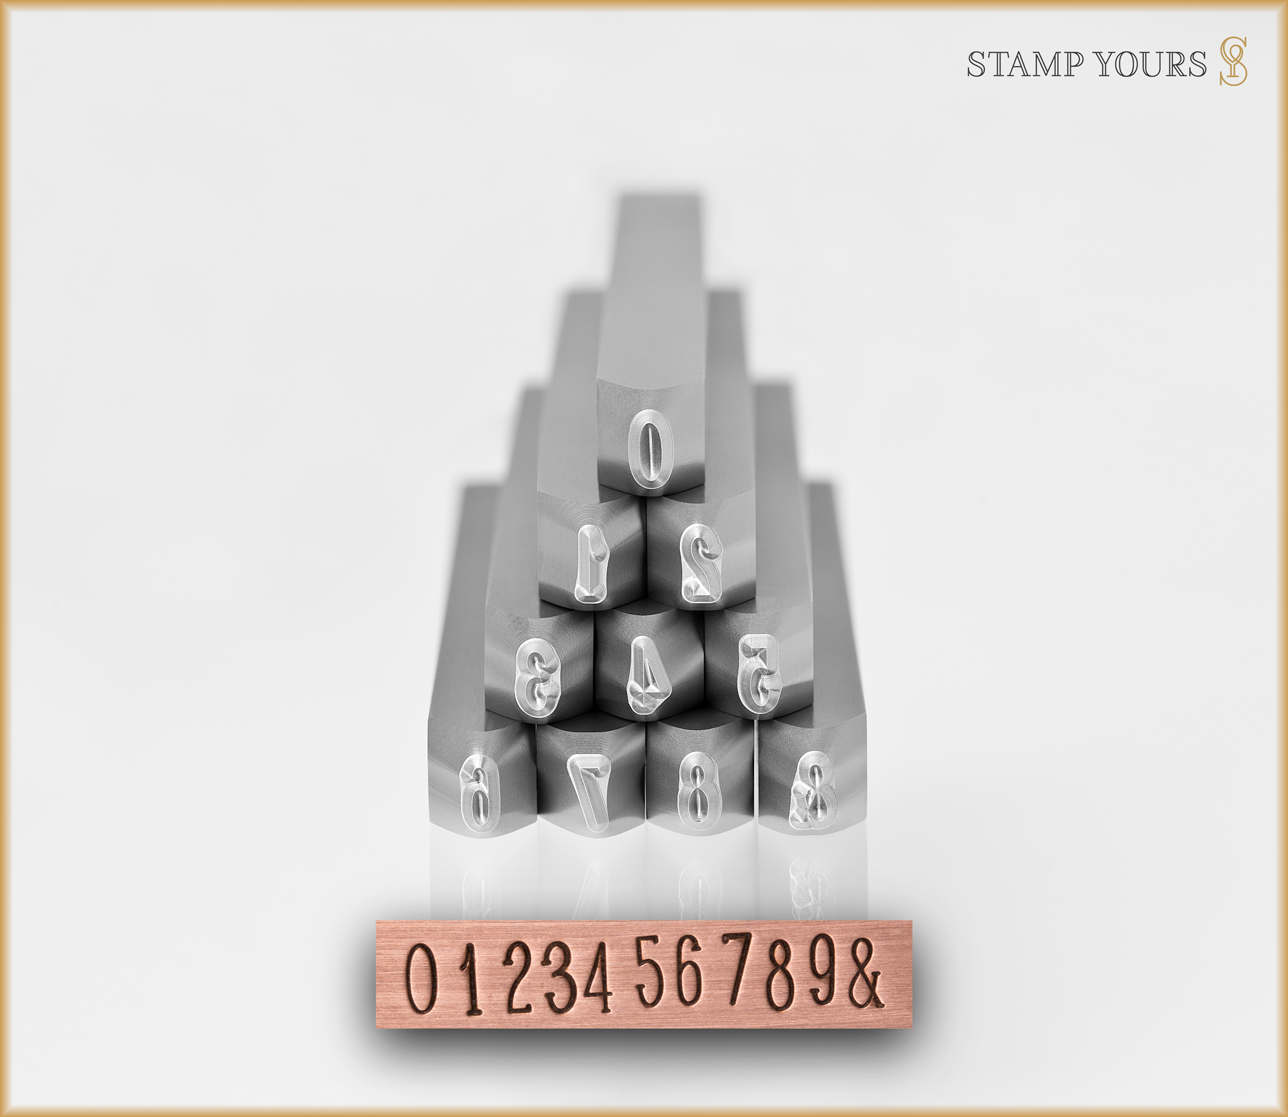 Hot Cakes 3.5mm Numbers - Stamp Yours